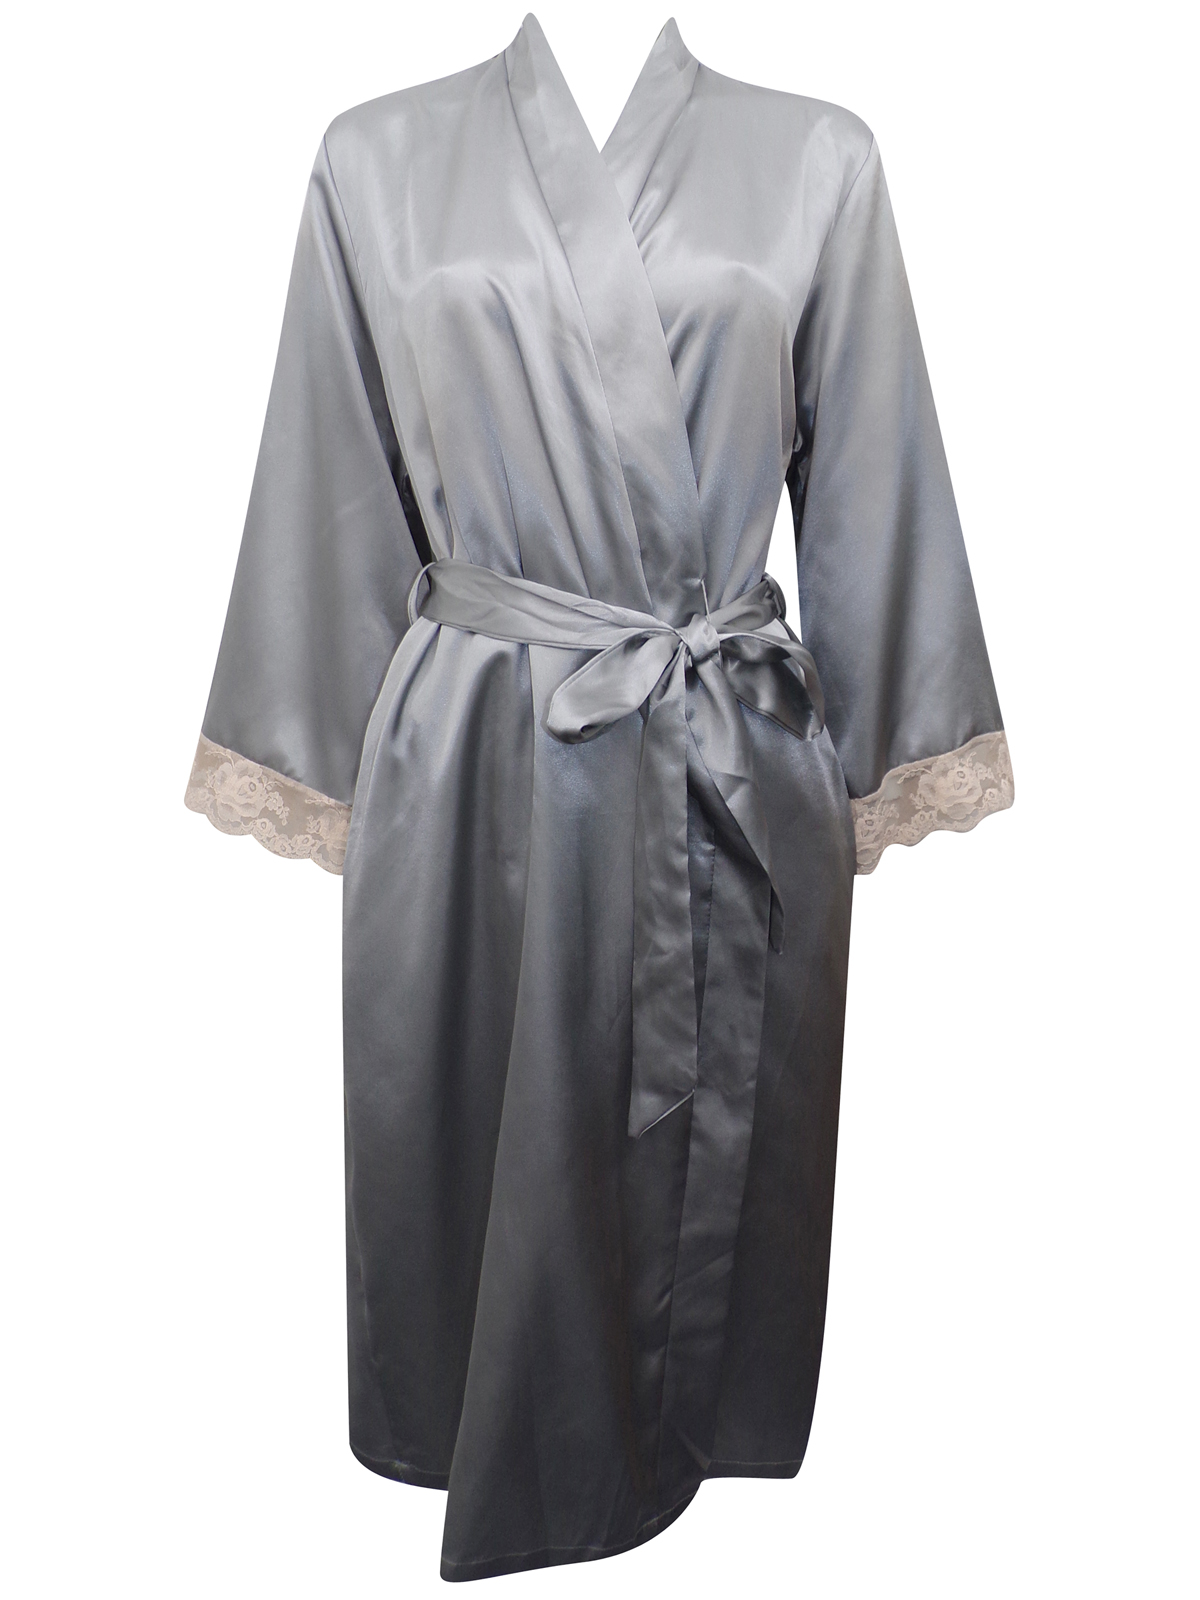 Peter New York - - Peter New York SILVER Contrast Lace Trim Satin Wrap ...